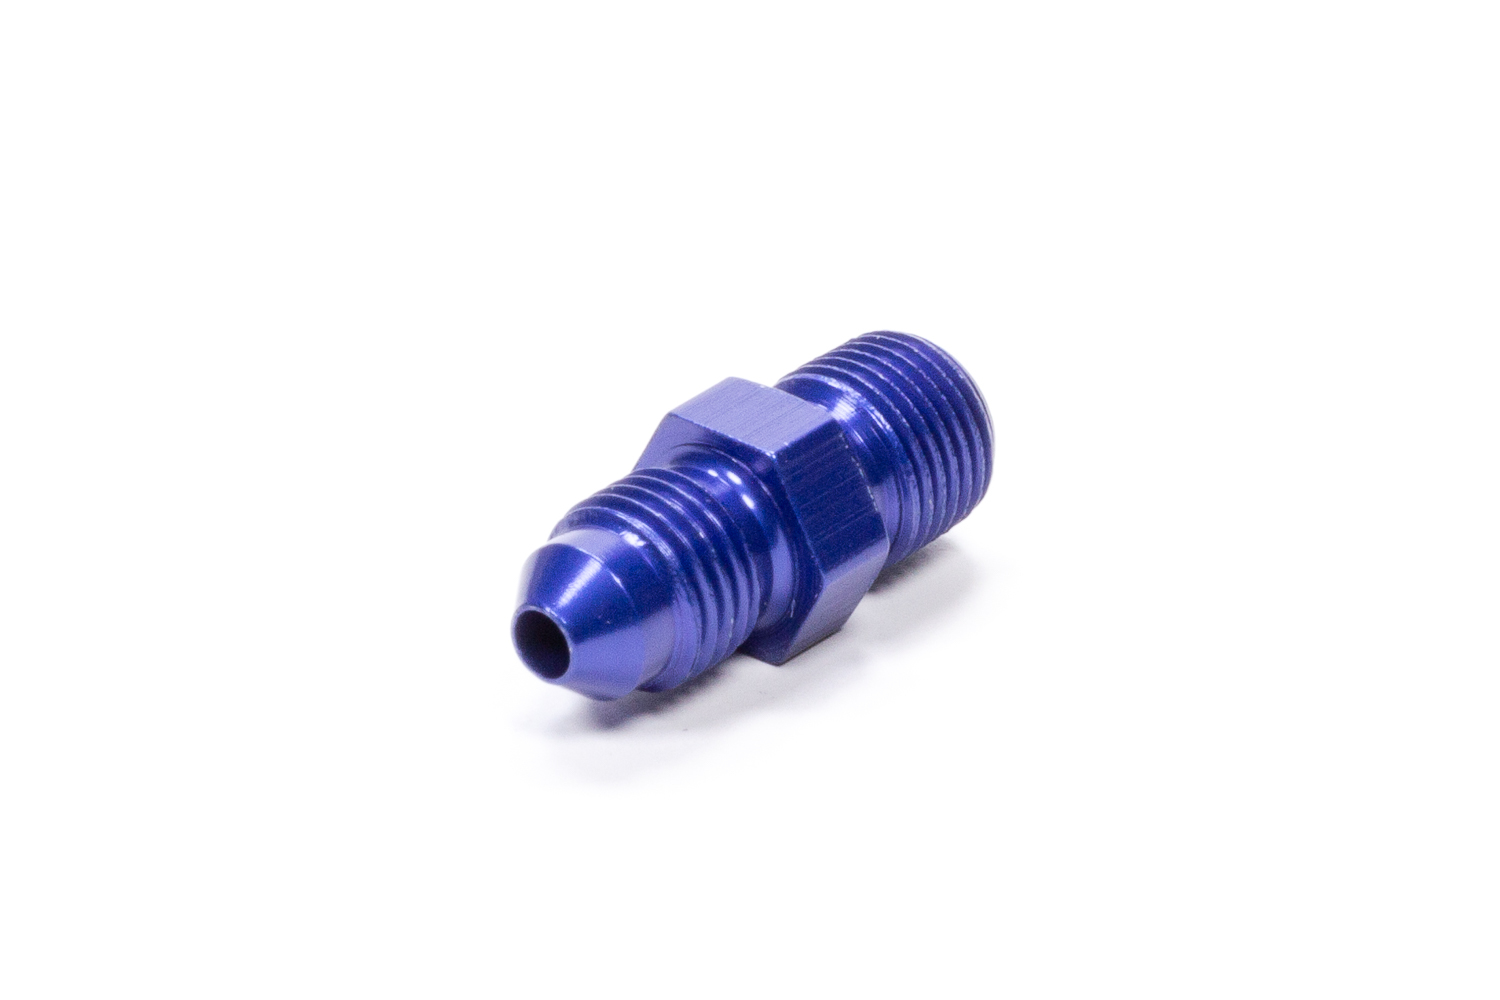 Fragola 481605 Fitting, Adapter, Straight, 4 AN Male to 1/4 in NPT Male, Aluminum, Blue Anodized, Each